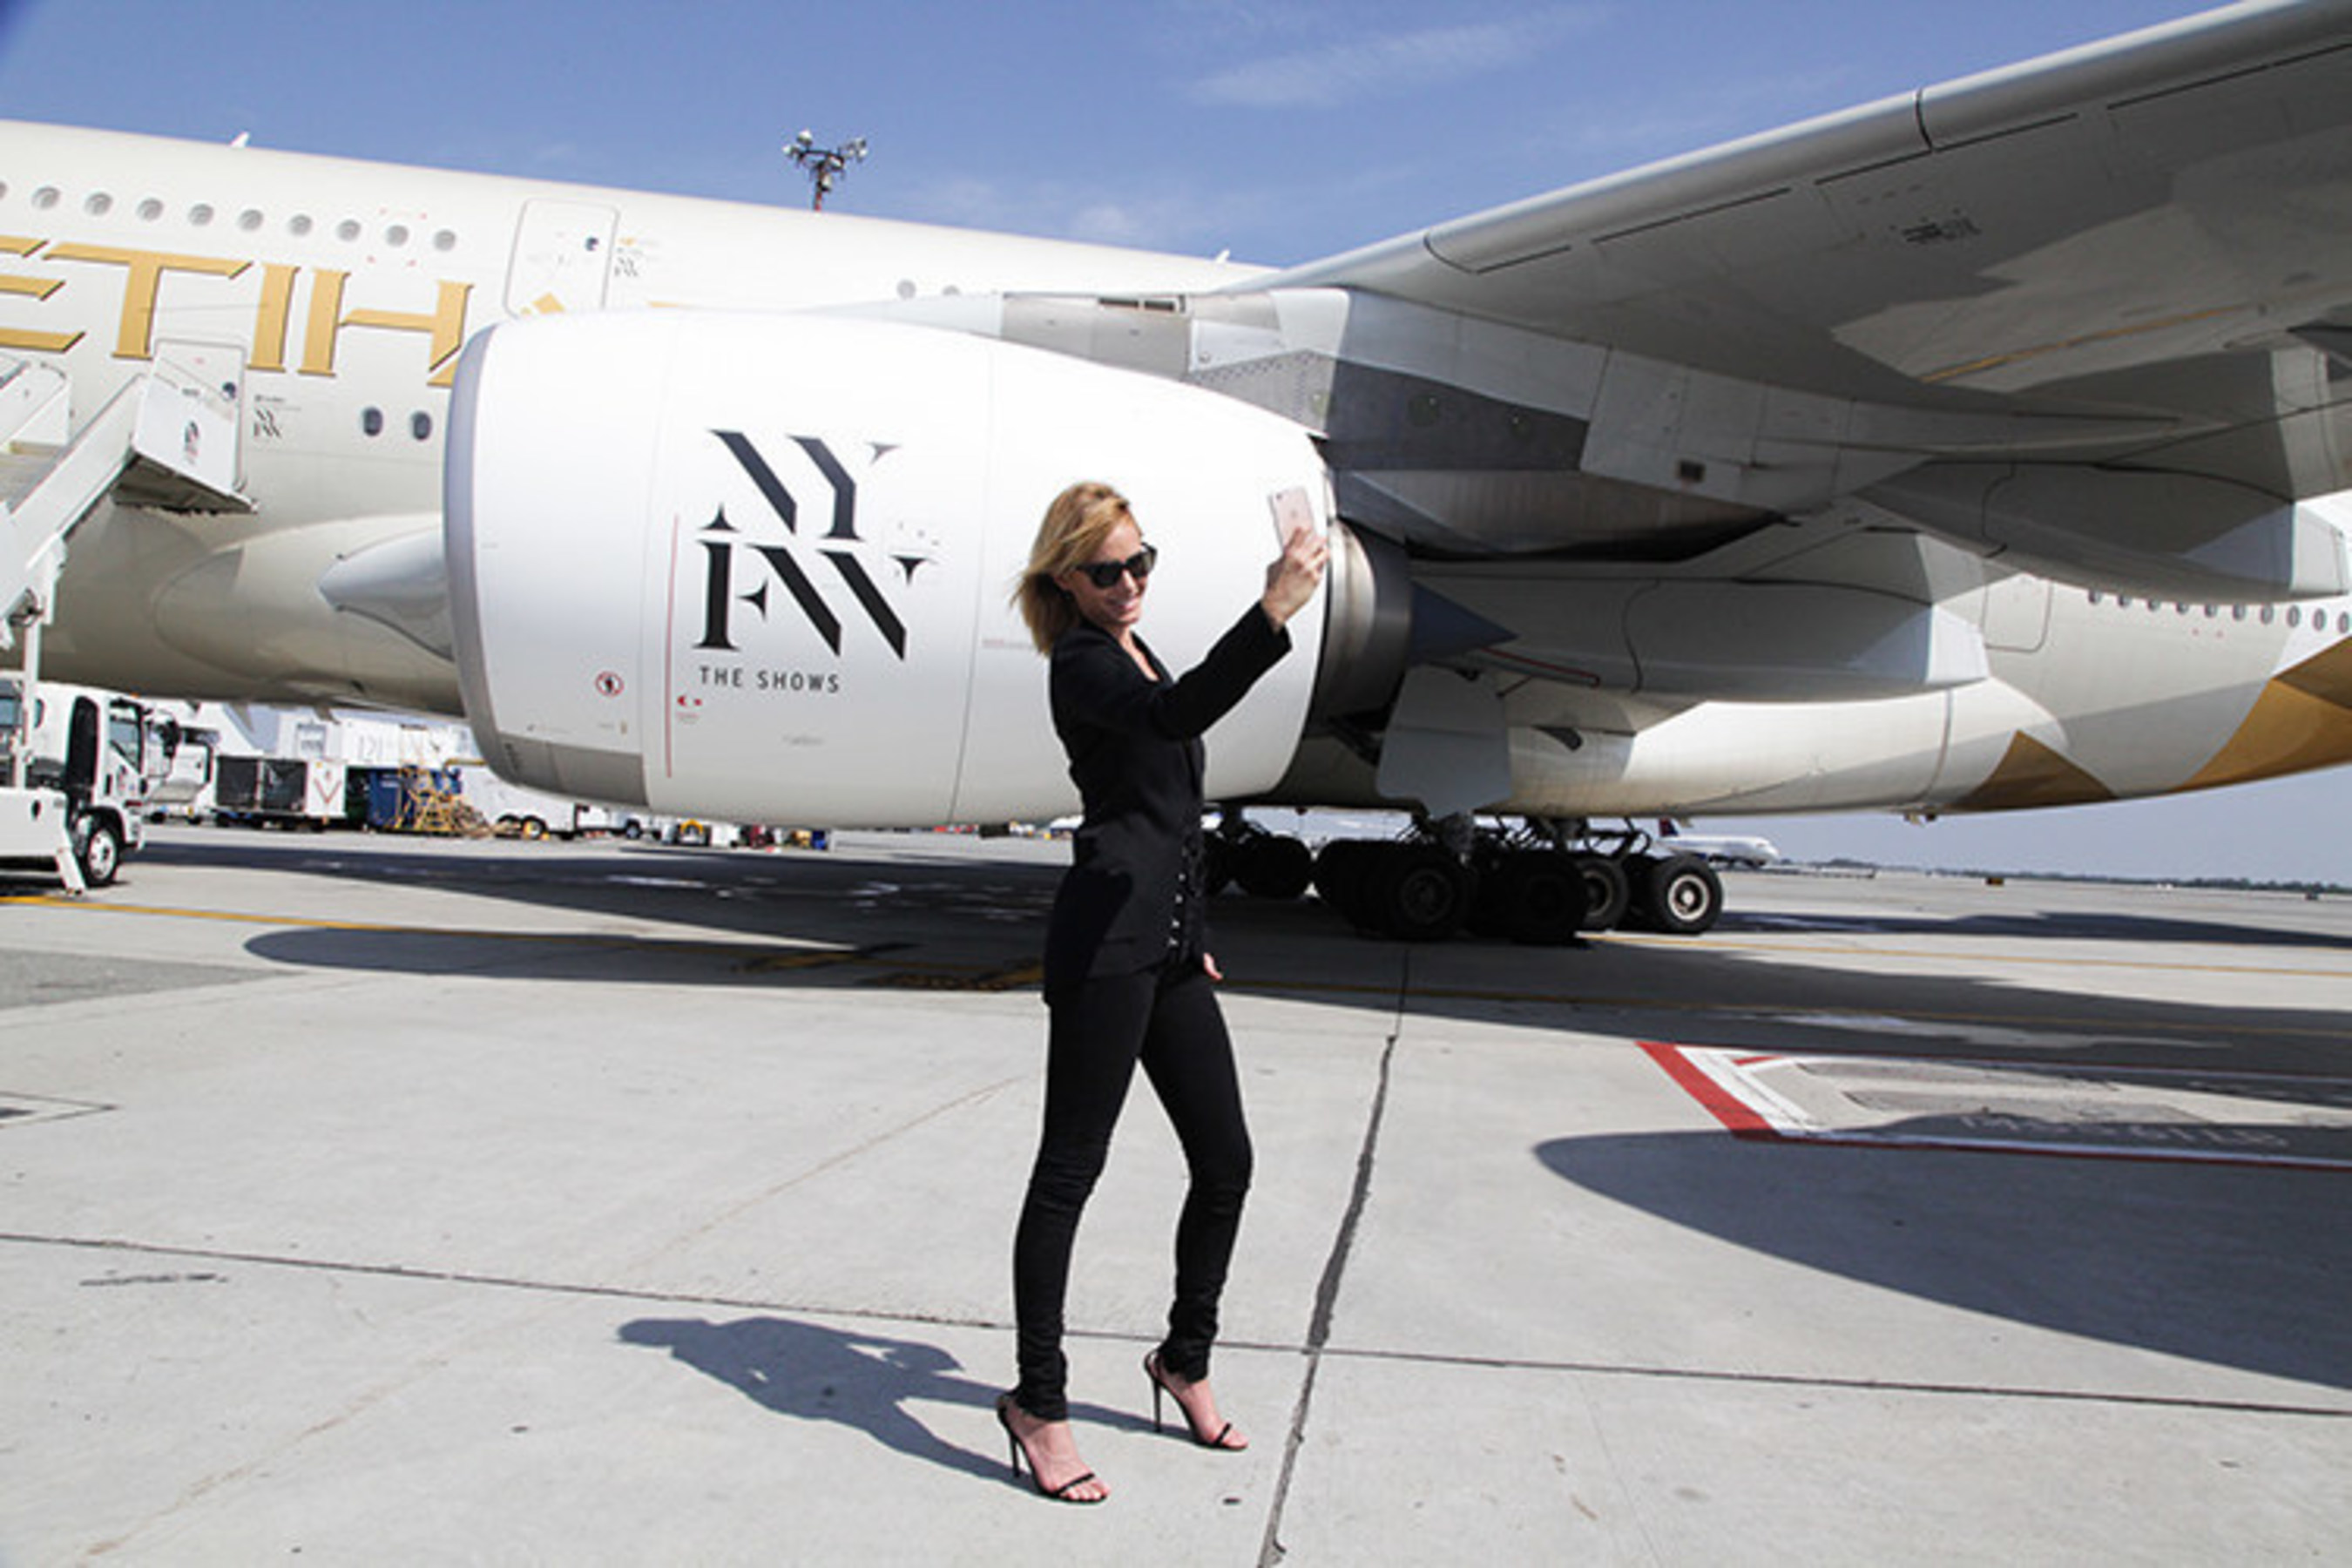 Supermodel Amber Valletta takes a selfie with #Etihad Airways A380 aircraft at JFK International Airport.